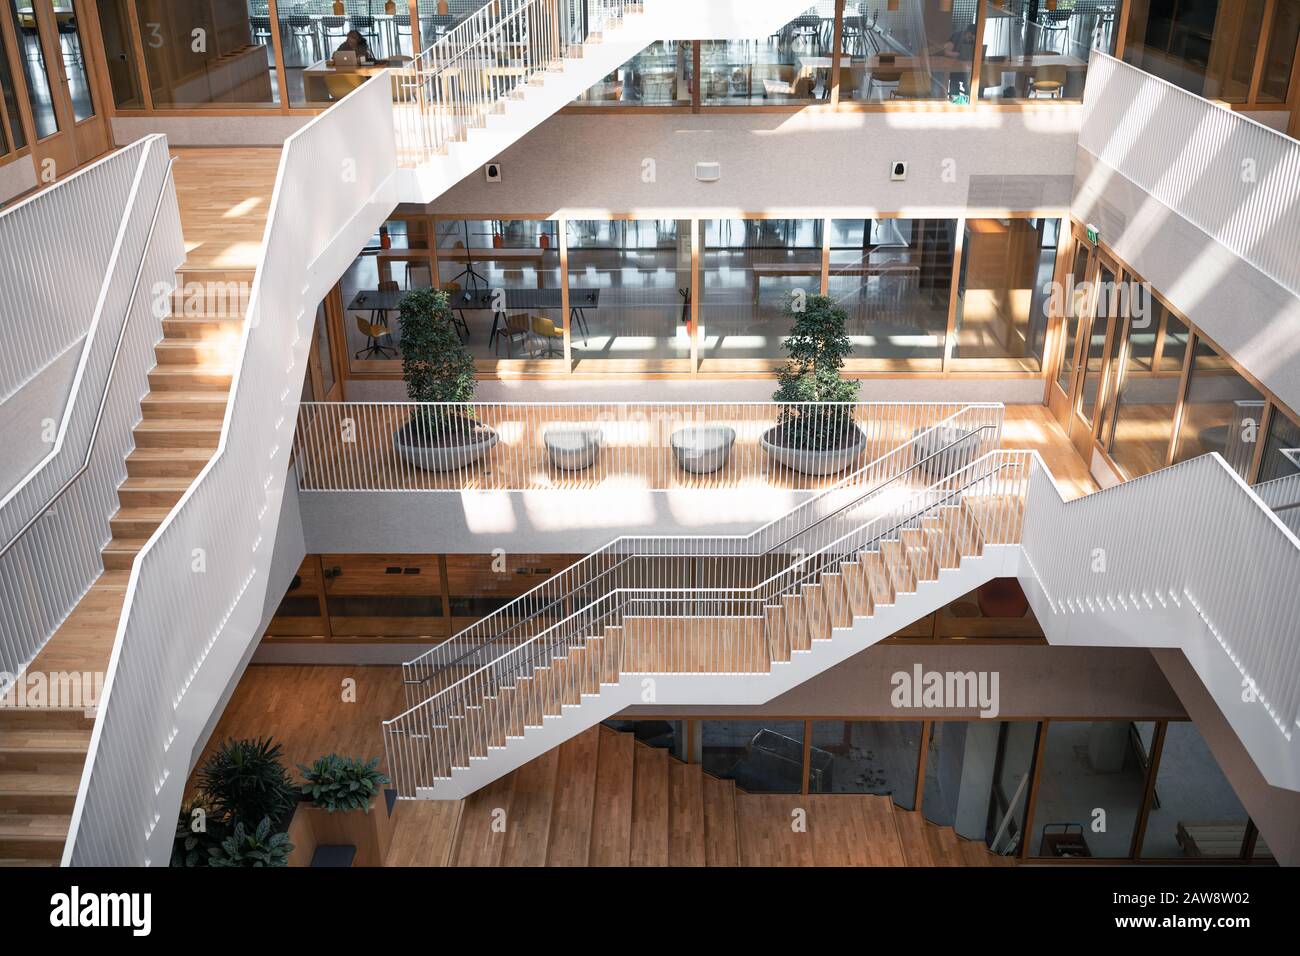 Interior of the Polak Building at the Erasmus University Woudesteijn campus in Rotterdam, the Netherlands Stock Photo